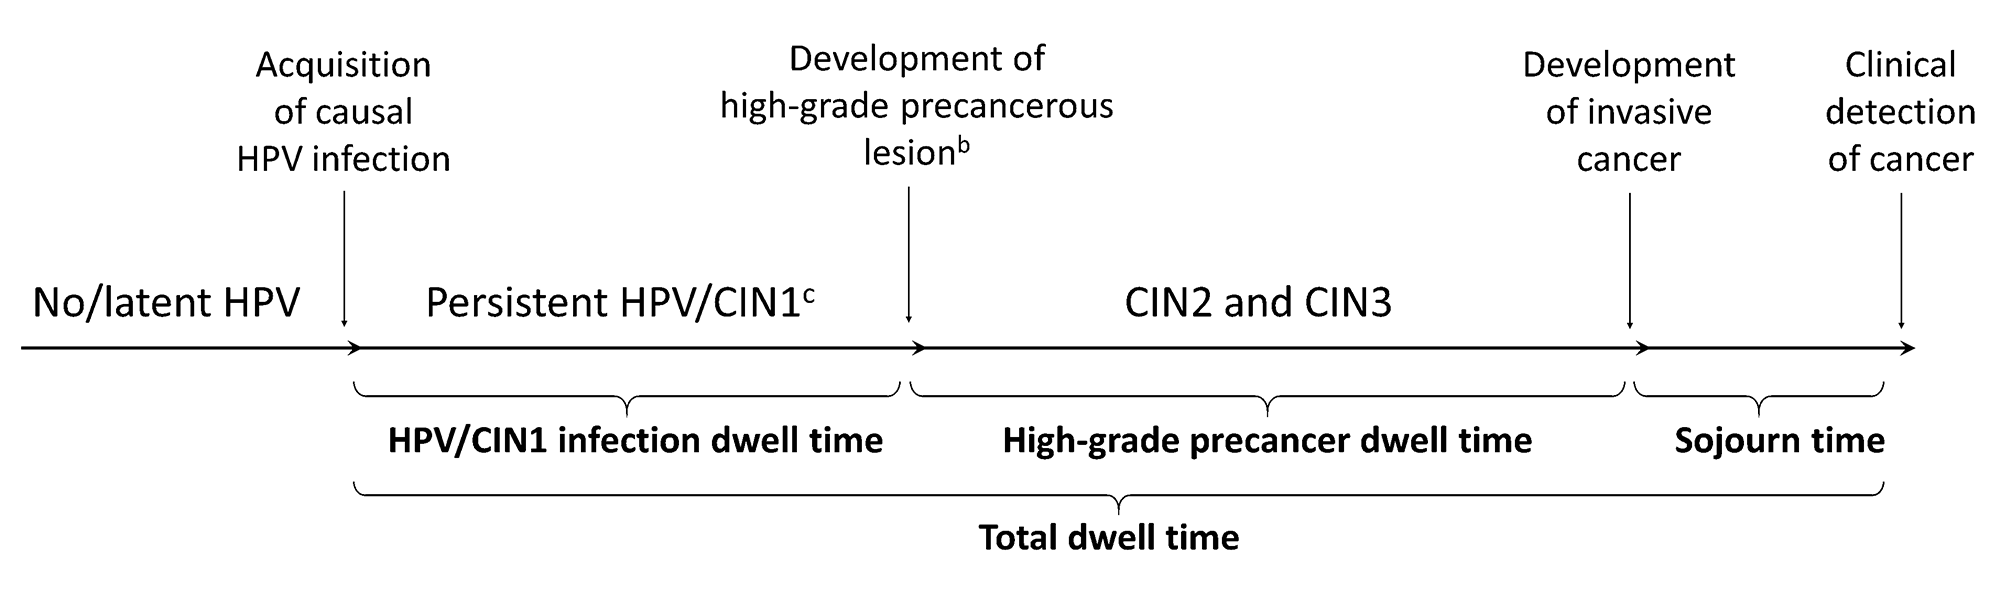 Figure 1 outlines the natural history of the human papillomavirus (HPV) to induced cervical cancer (CC) pathway.  This pathway is not directly observable, yet the age of HPV acquisition and duration of preclinical disease (dwell time) impacts the effectiveness of prevention policies.  Dwell time is shown in the diagram as the time from acquisition of a causal HPV infection to the clinical detection of cancer.